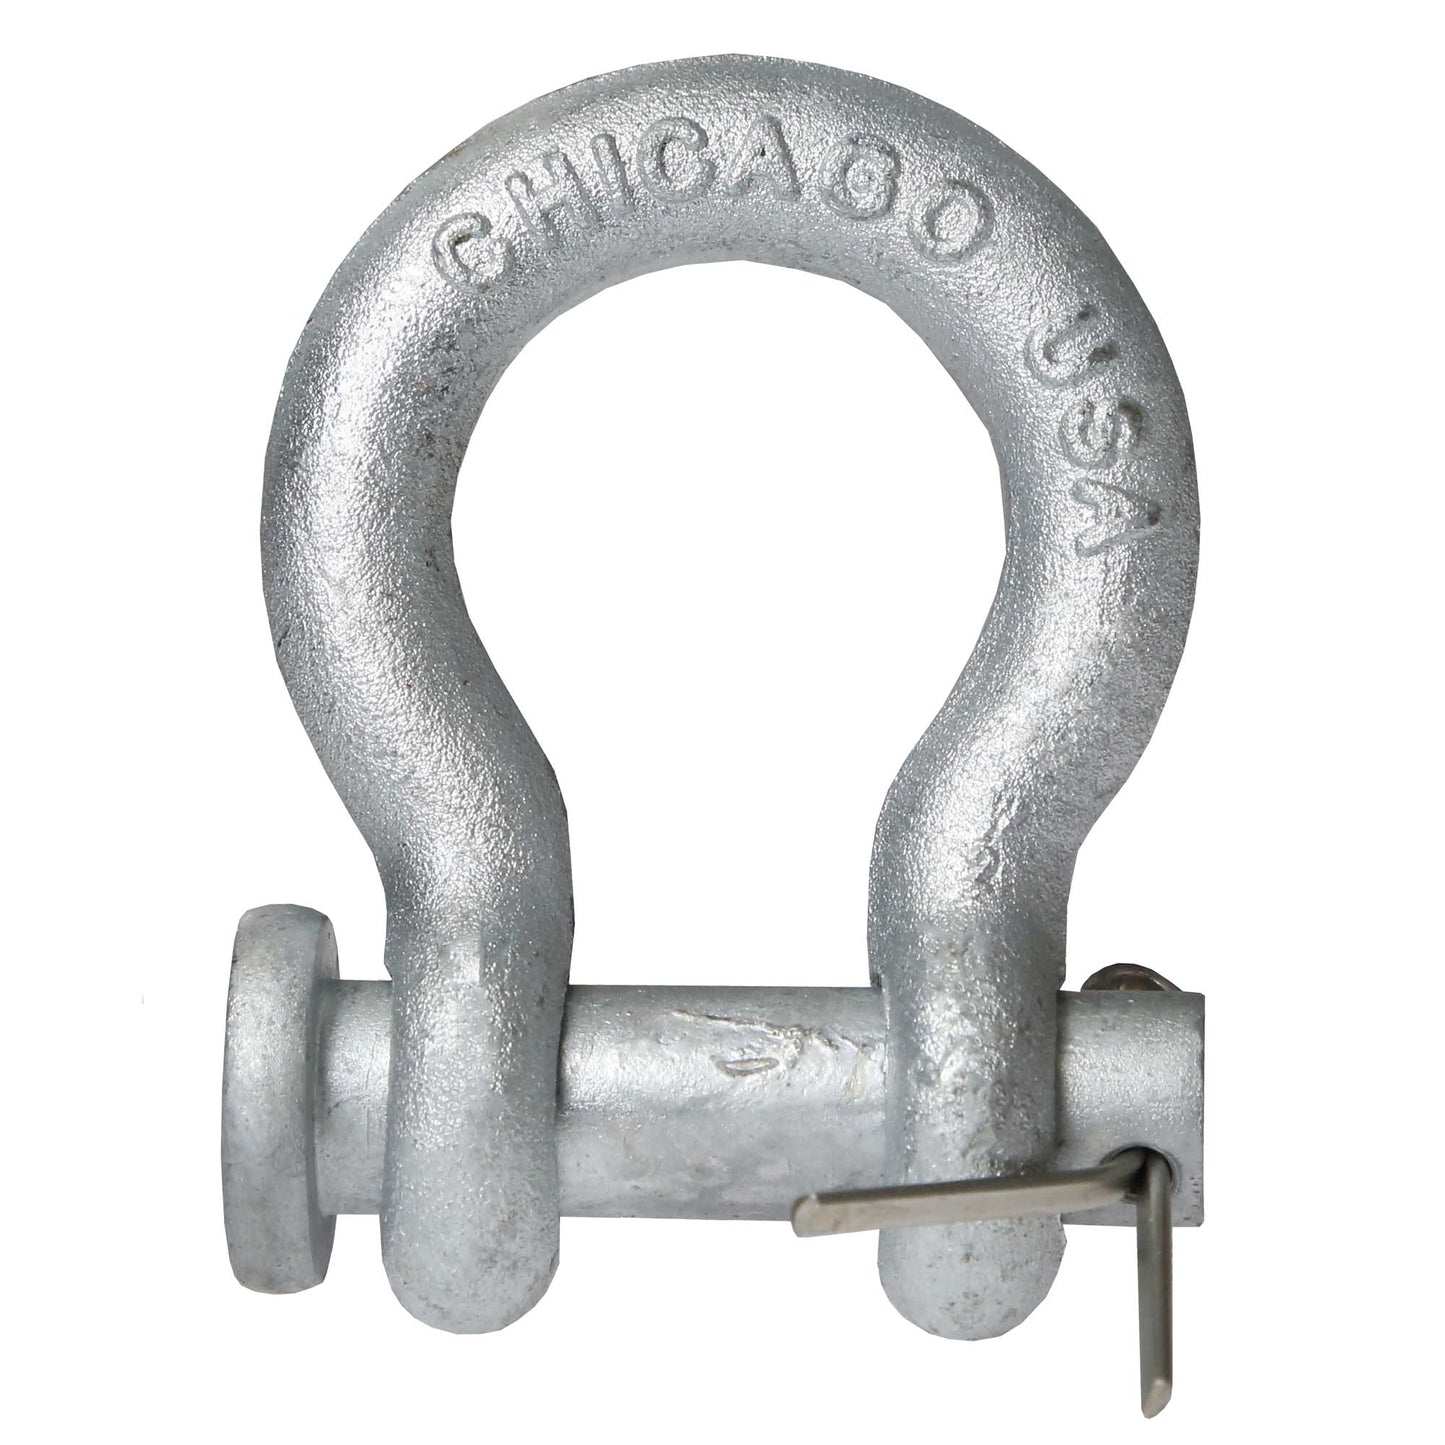 Anchor Shackle - Chicago Hardware - Round Pin - 1-1/2" Galvanized Steel - 17 Ton primary image